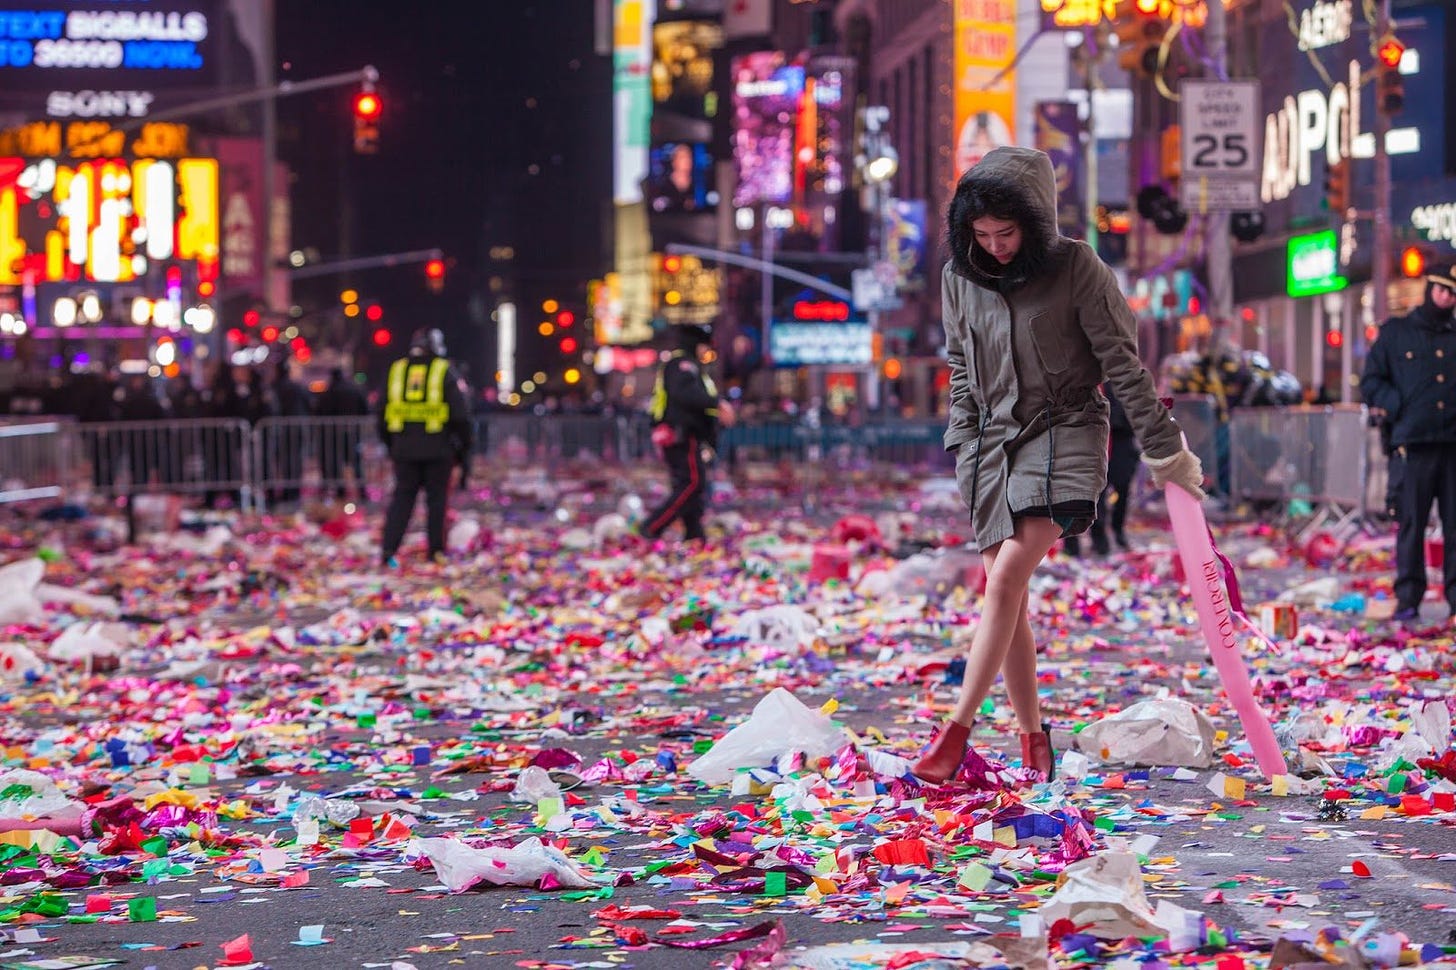 The Impressive Logistics Behind Times Square's New Year's Eve